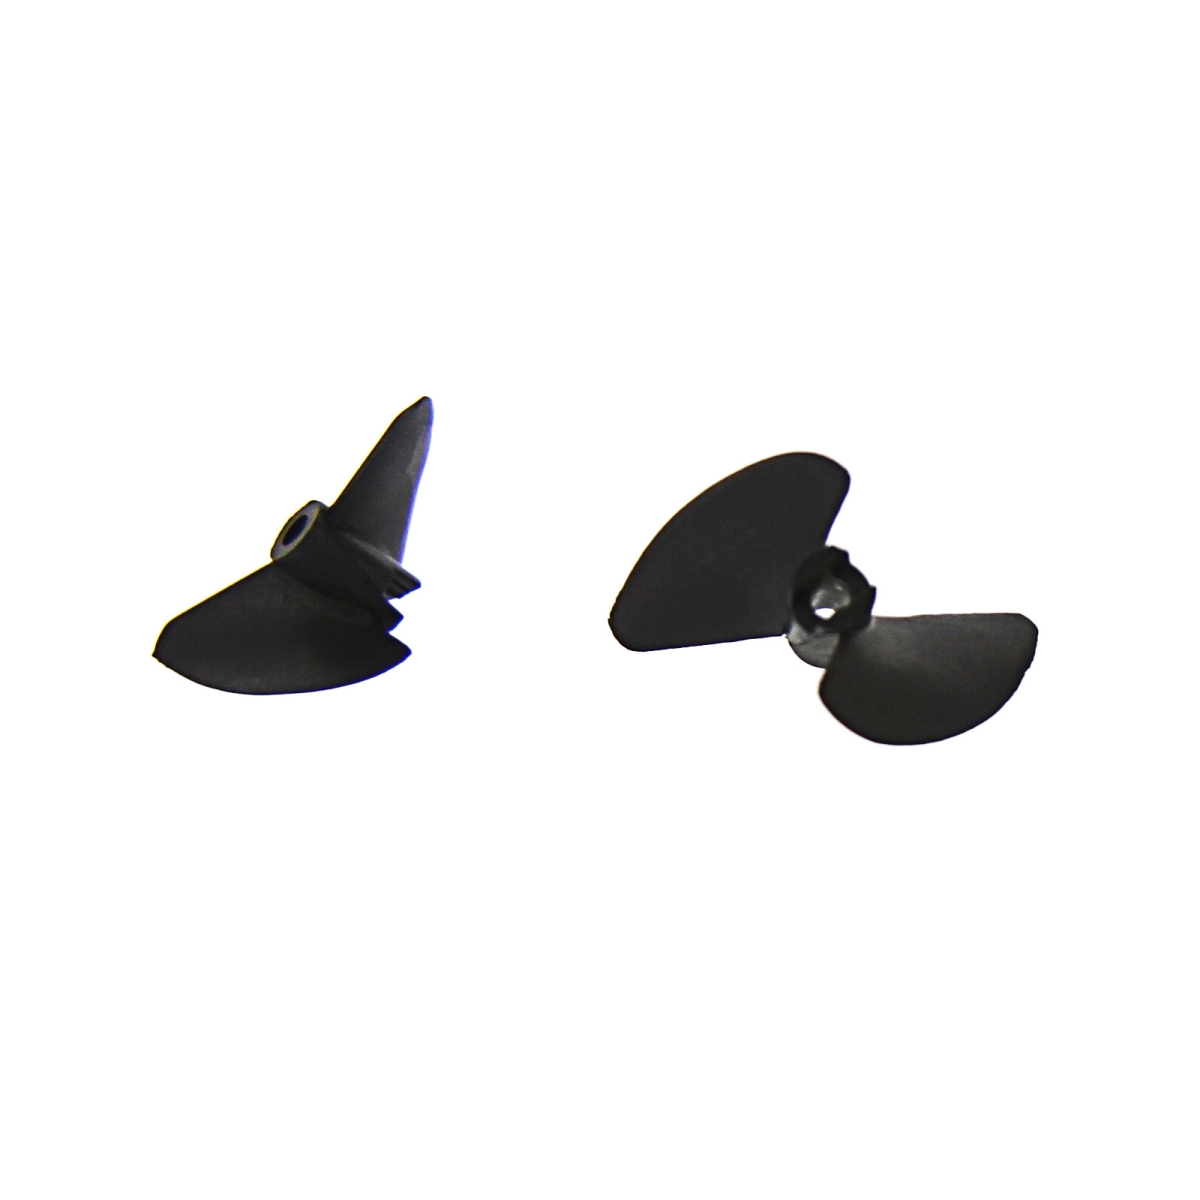 Atk18126 Propeller For Barbwire 2 Rc Boat